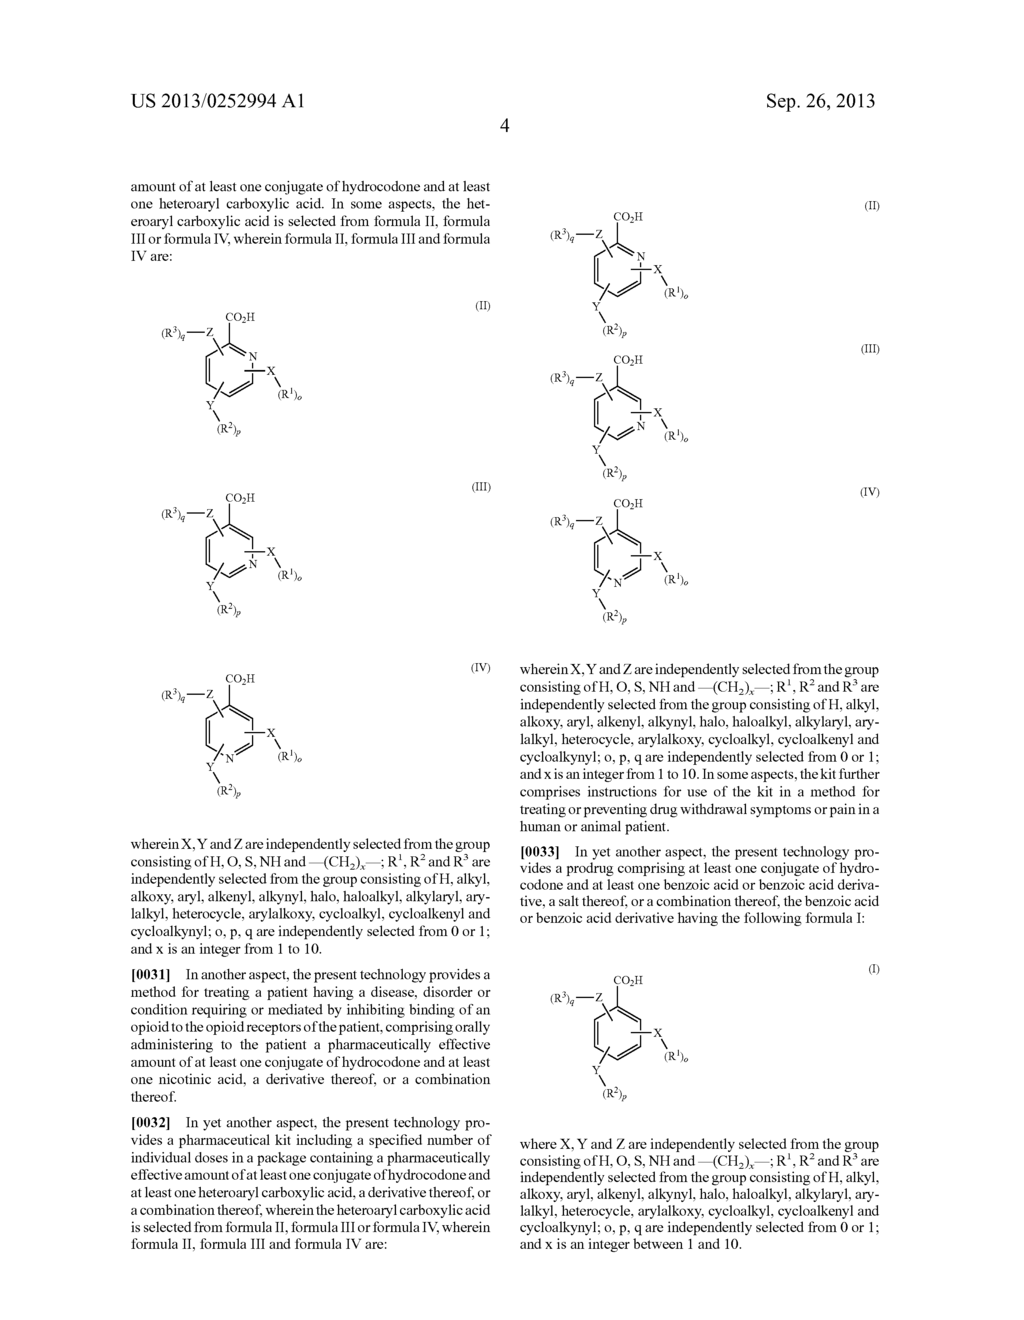 Benzoic Acid, Benzoic Acid Derivatives and Heteroaryl Carboxylic Acid     Conjugates of Hydrocodone, Prodrugs, Methods of Making and Use Thereof - diagram, schematic, and image 20